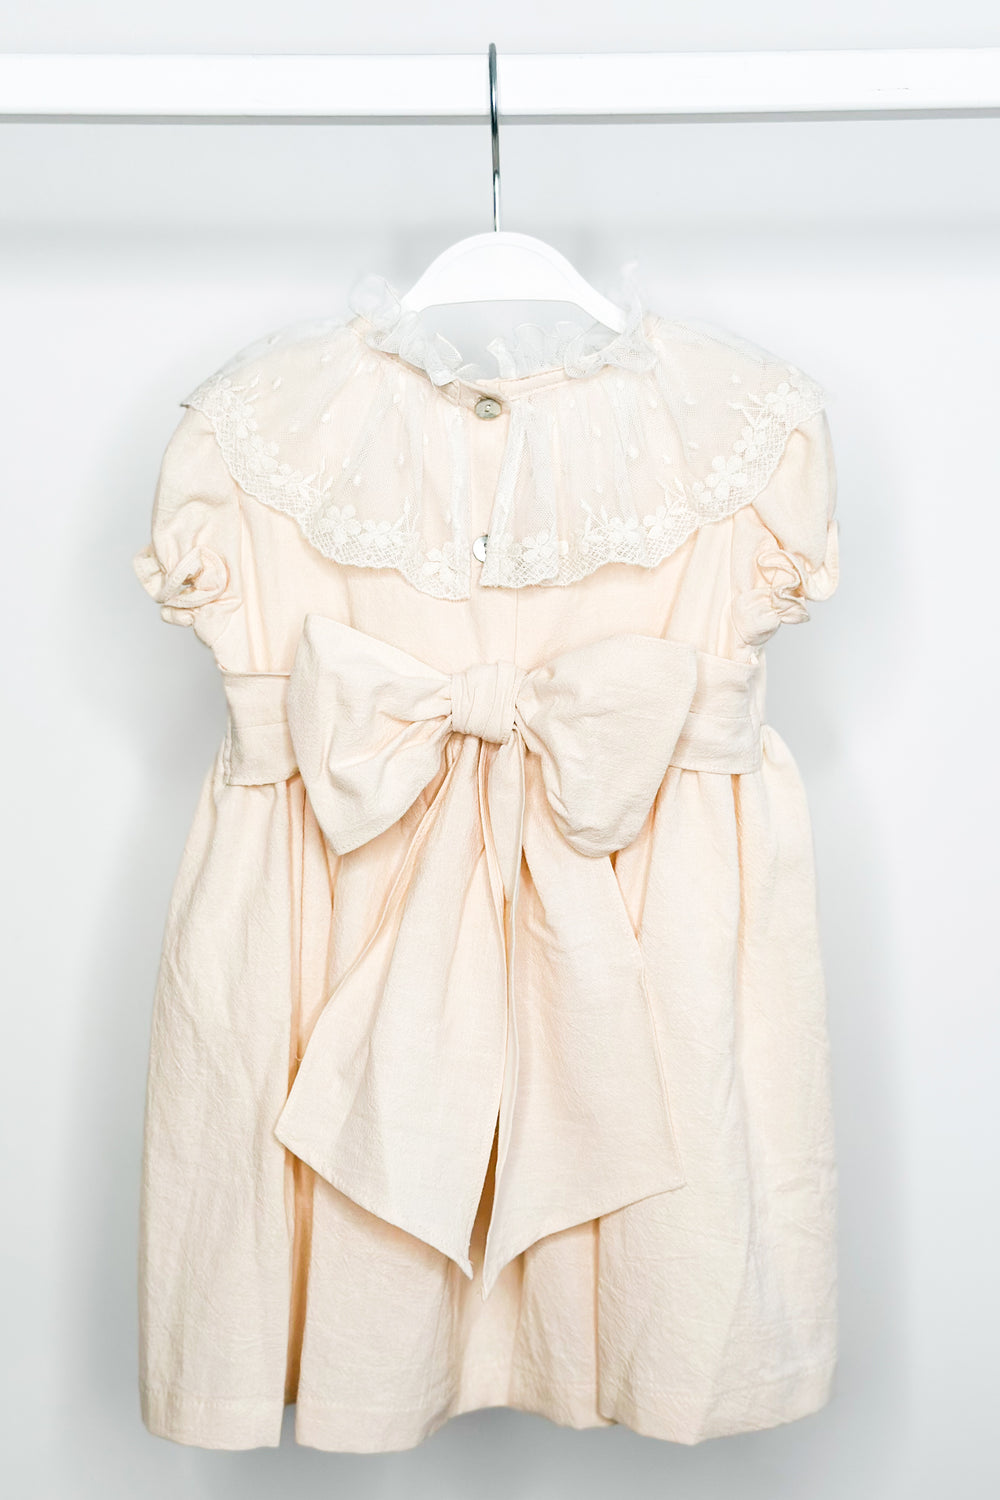 Fofettes "Arabella" Apricot Lace Collar Dress | Millie and John